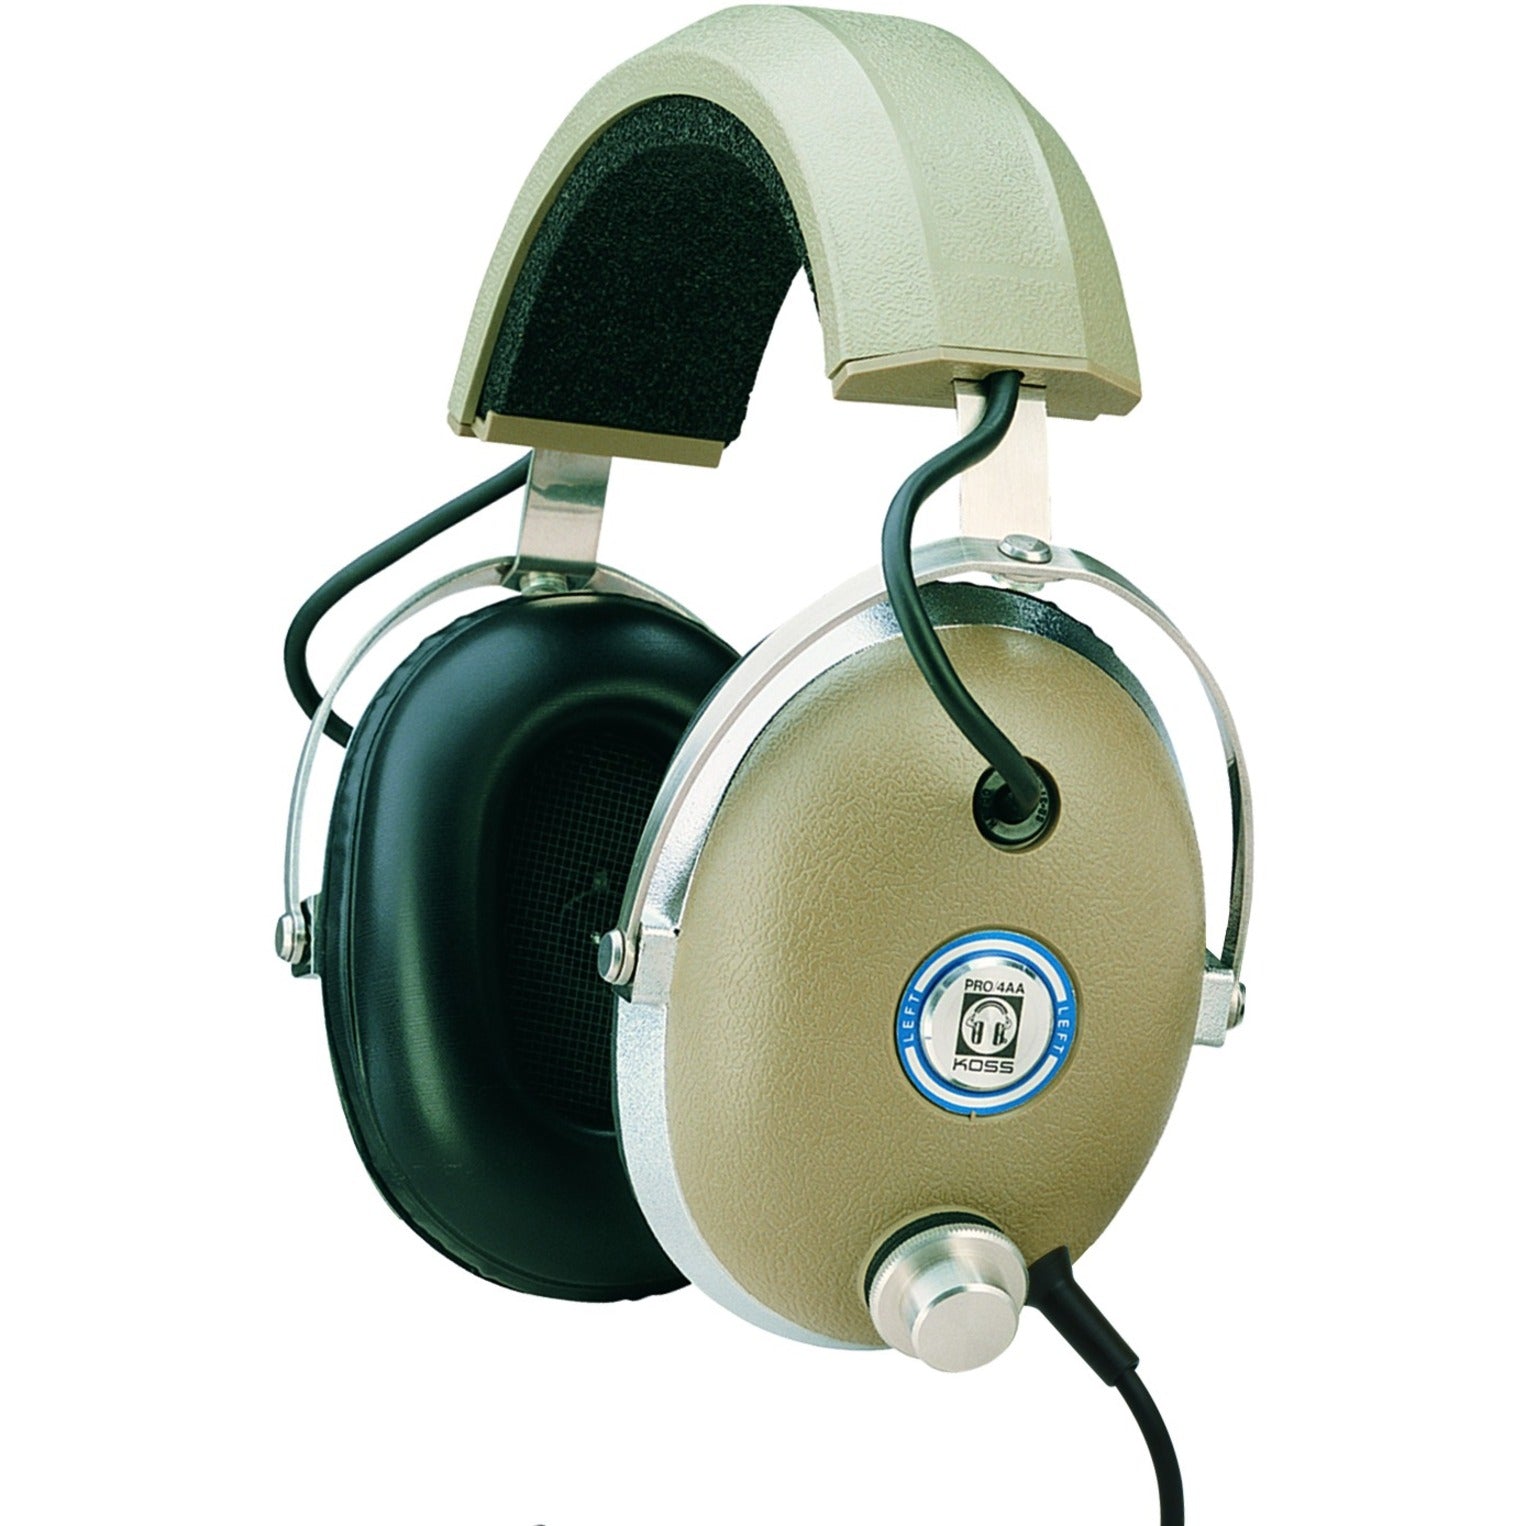 Koss PRO4AA Stereophone, Over-the-head Wired Headphone with 10 ft Cable, Gold Plated Connector